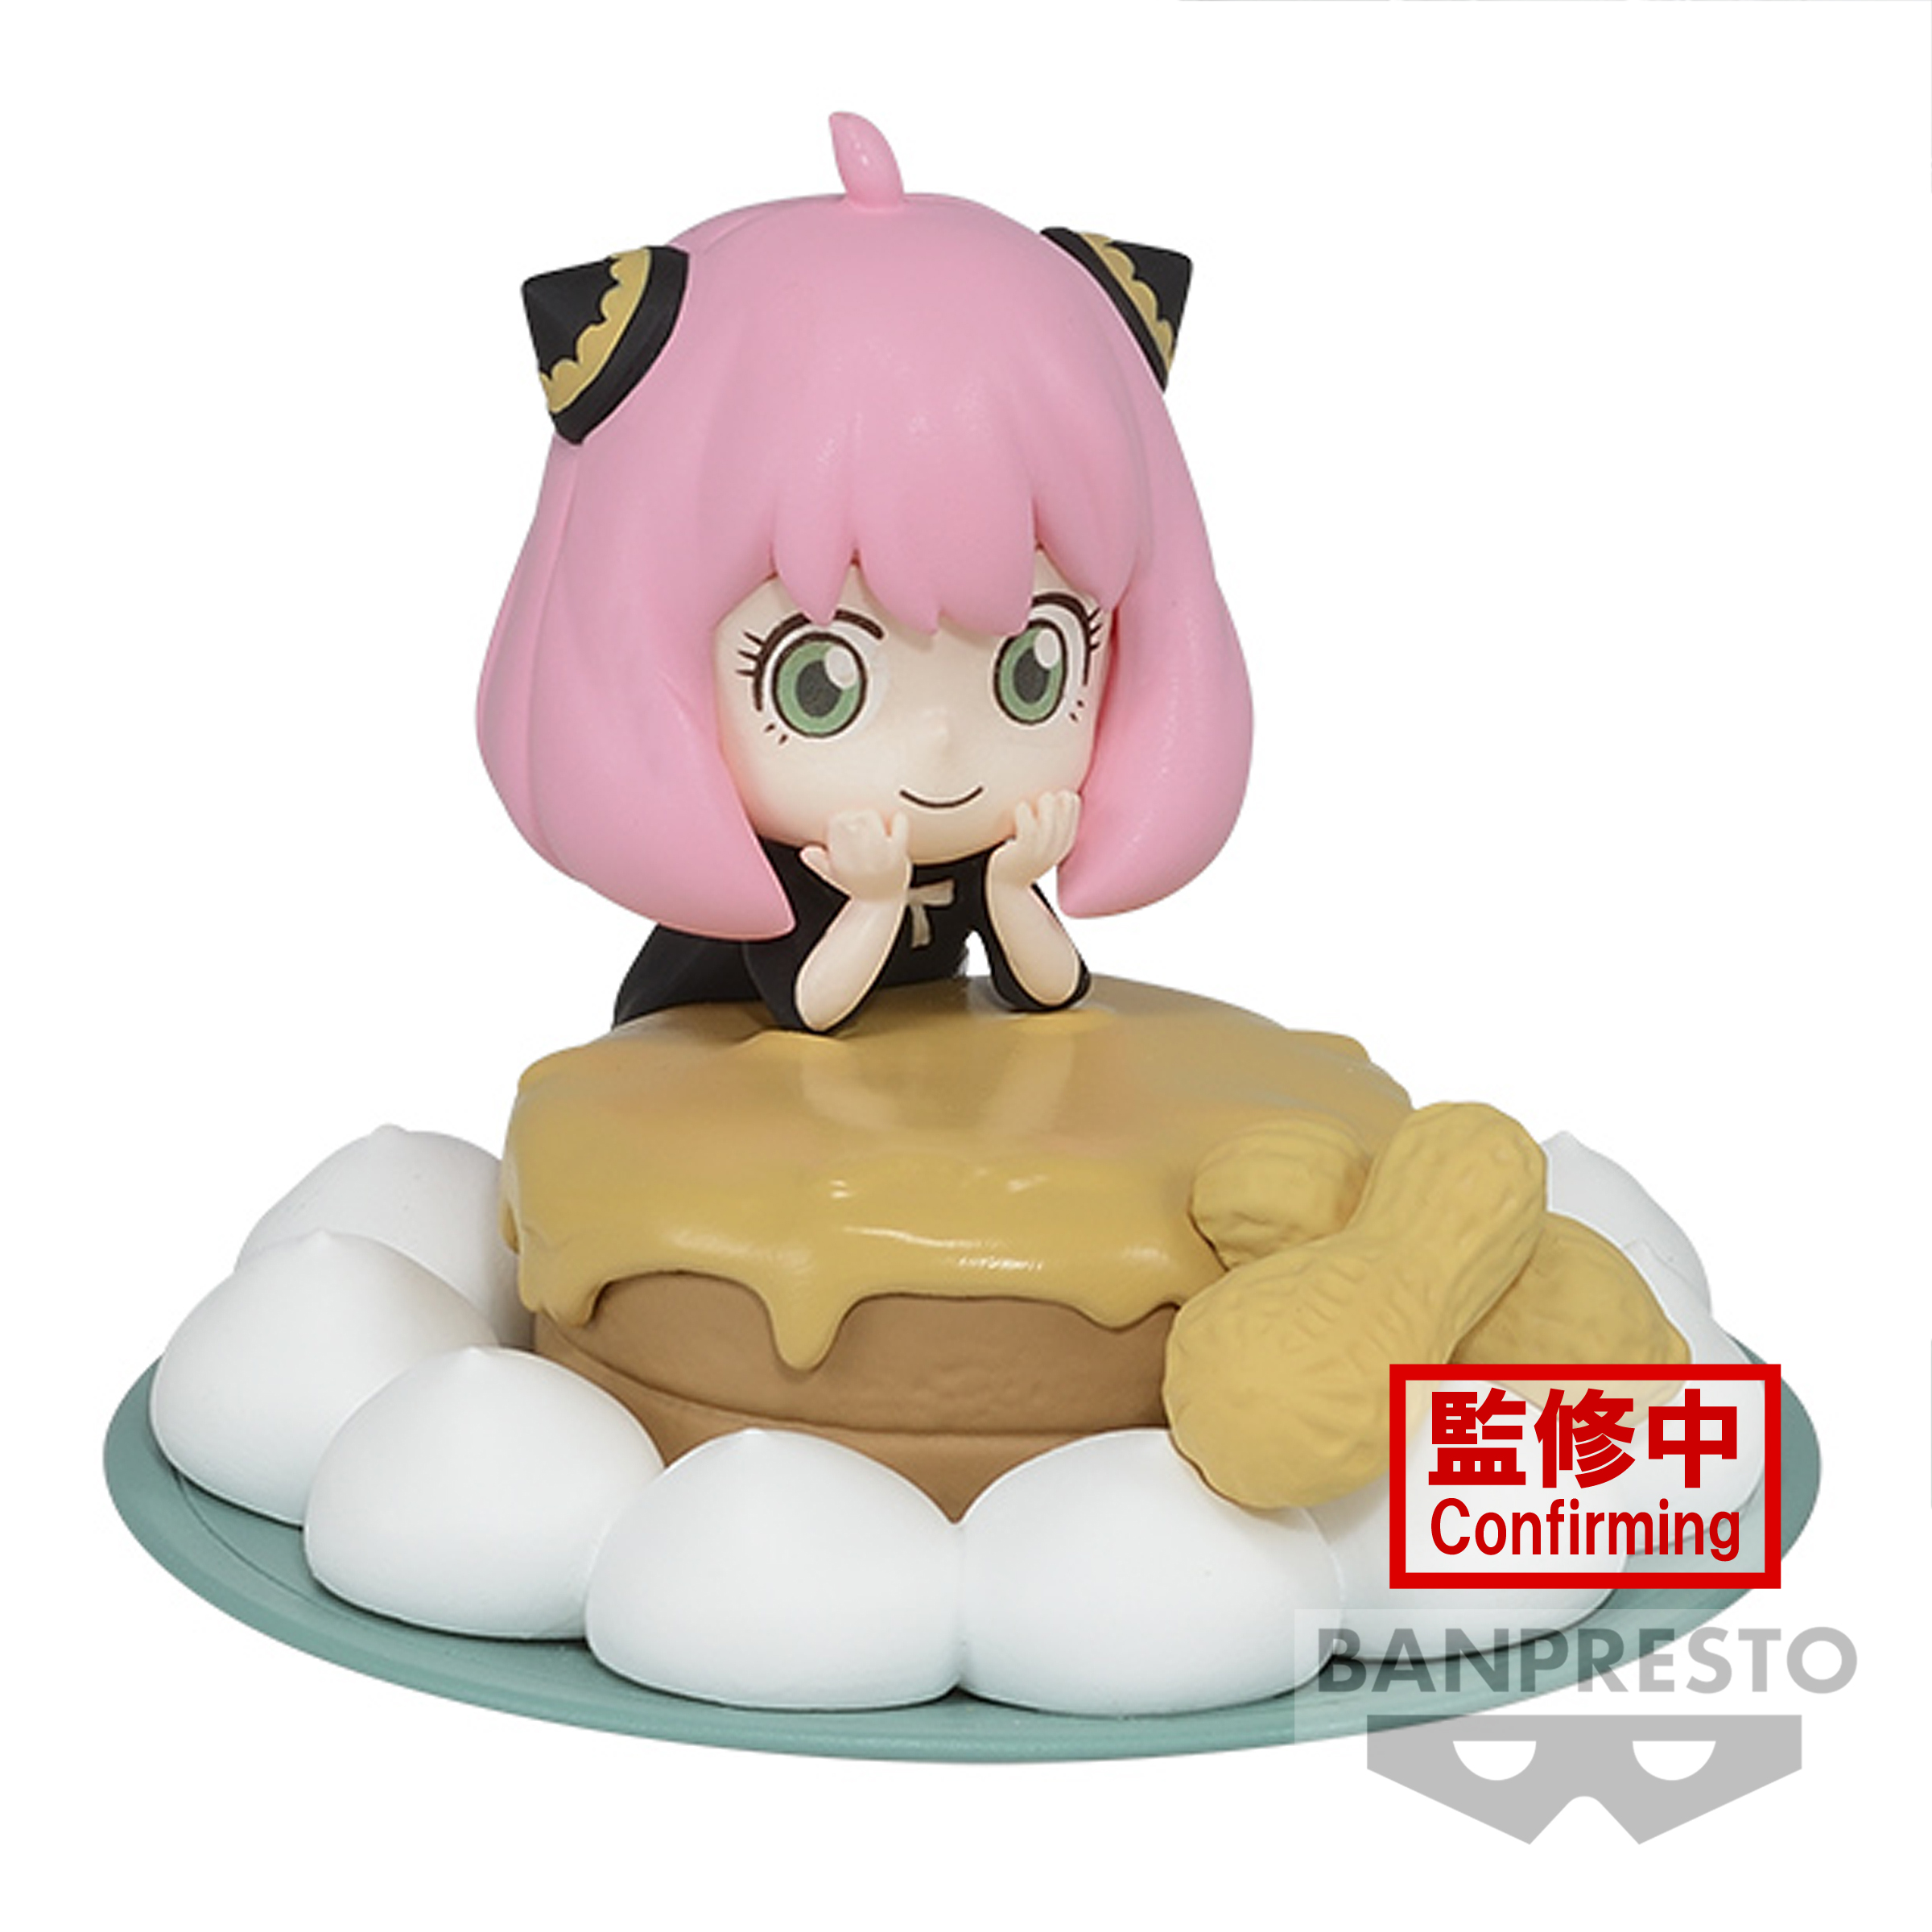 Spy X Family - Anya Forger Paldolce collection vol.1 Prize Figure (Dessert Ver.) image count 0